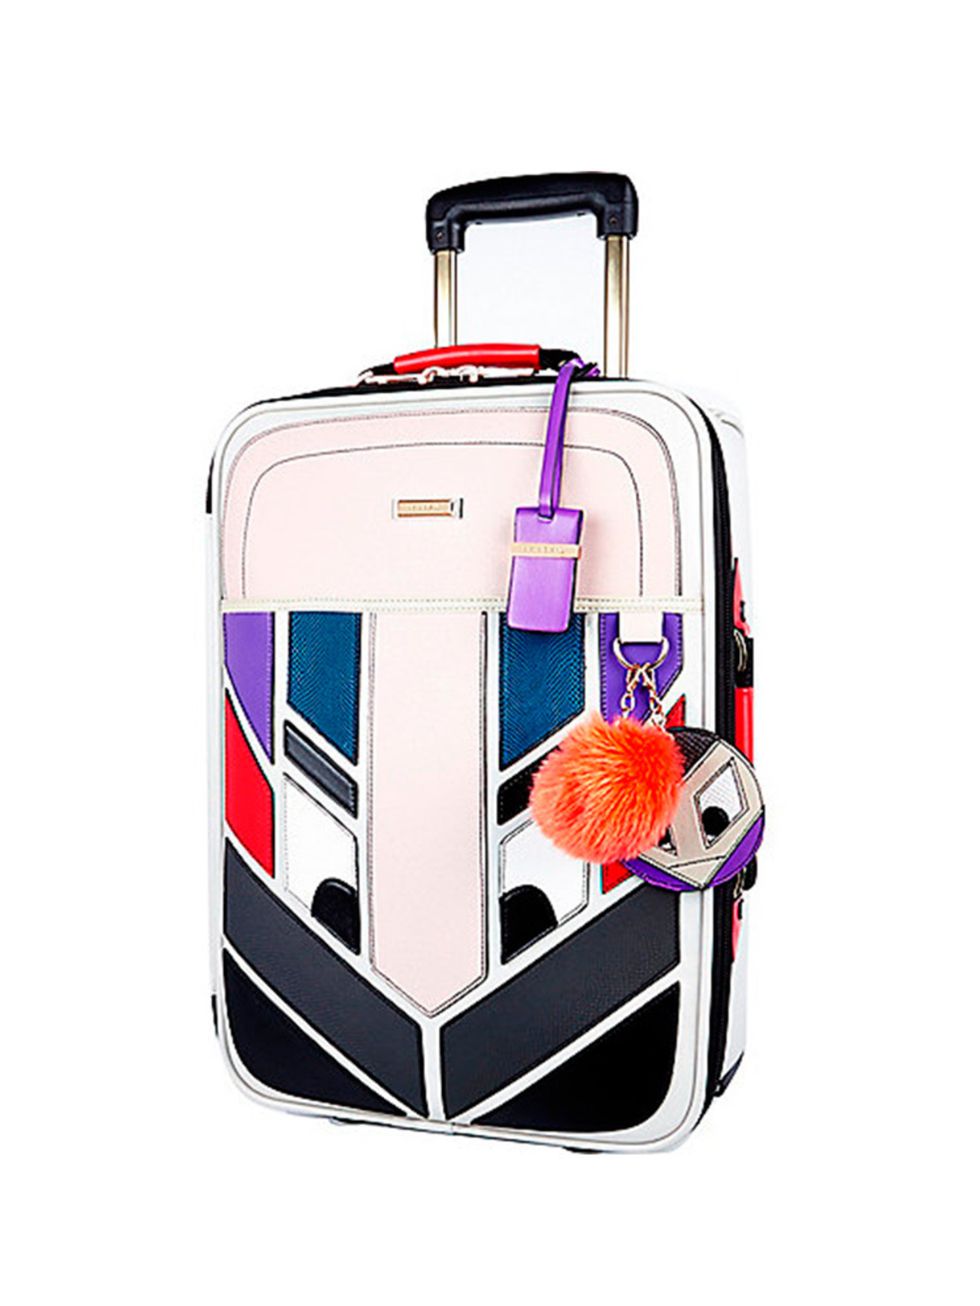 <p>Fashion Assistant Felicity Kay is packing her summer essintials in this cute suitcase. </p>

<p><a href="http://www.riverisland.com/women/bags--purses/make-up-bags--luggage/grey-monster-wheelie-suitcase-671825" style="font-size: 13px; line-height: 1.6;